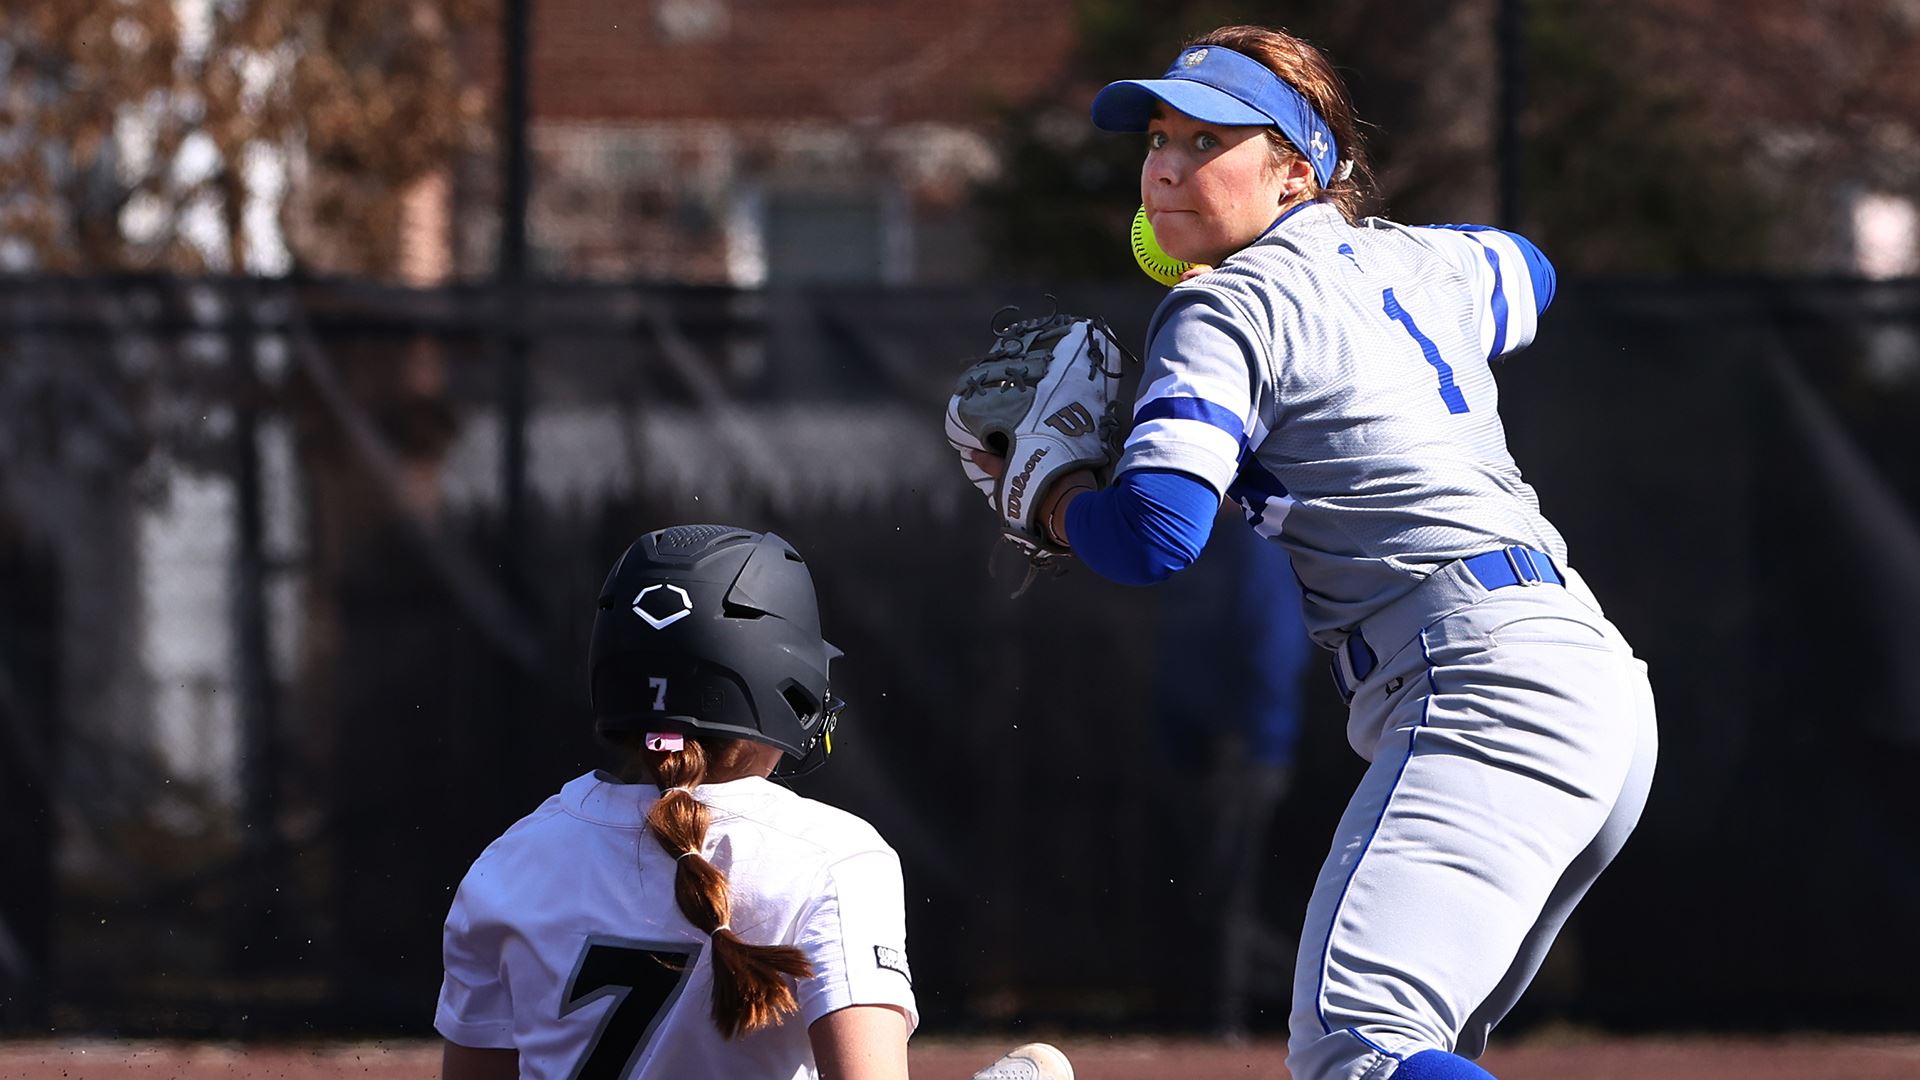 A Seton Hall women's softball pitcher attempts to throw the ball on the mound during a home game vs. Providence.